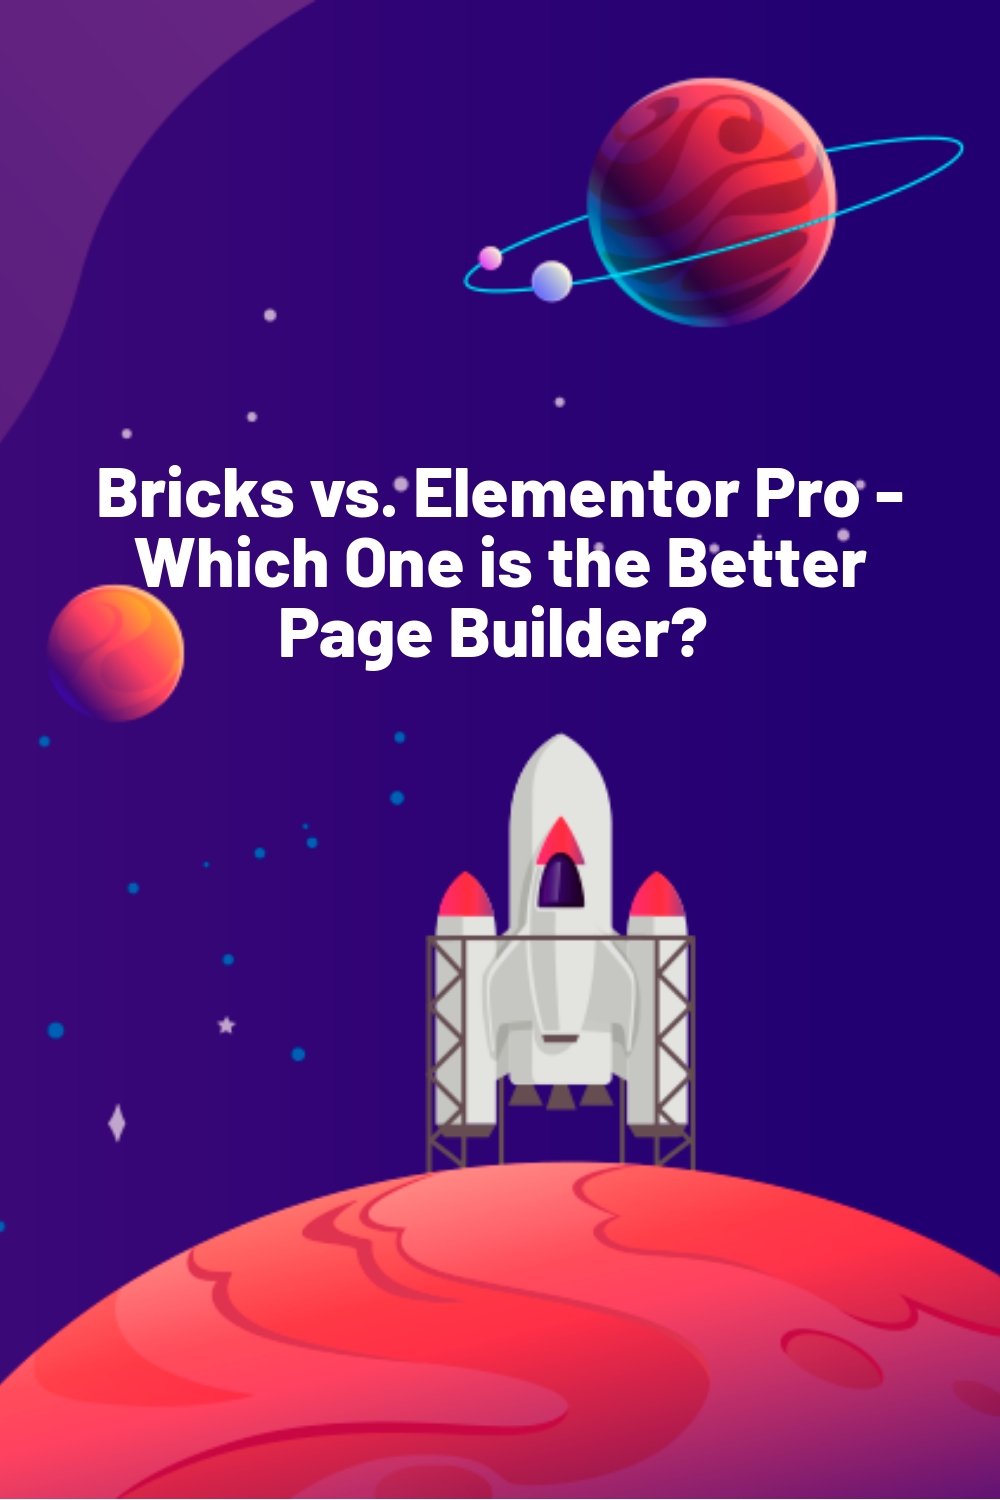 Bricks vs. Elementor Pro – Which One is the Better Page Builder? 